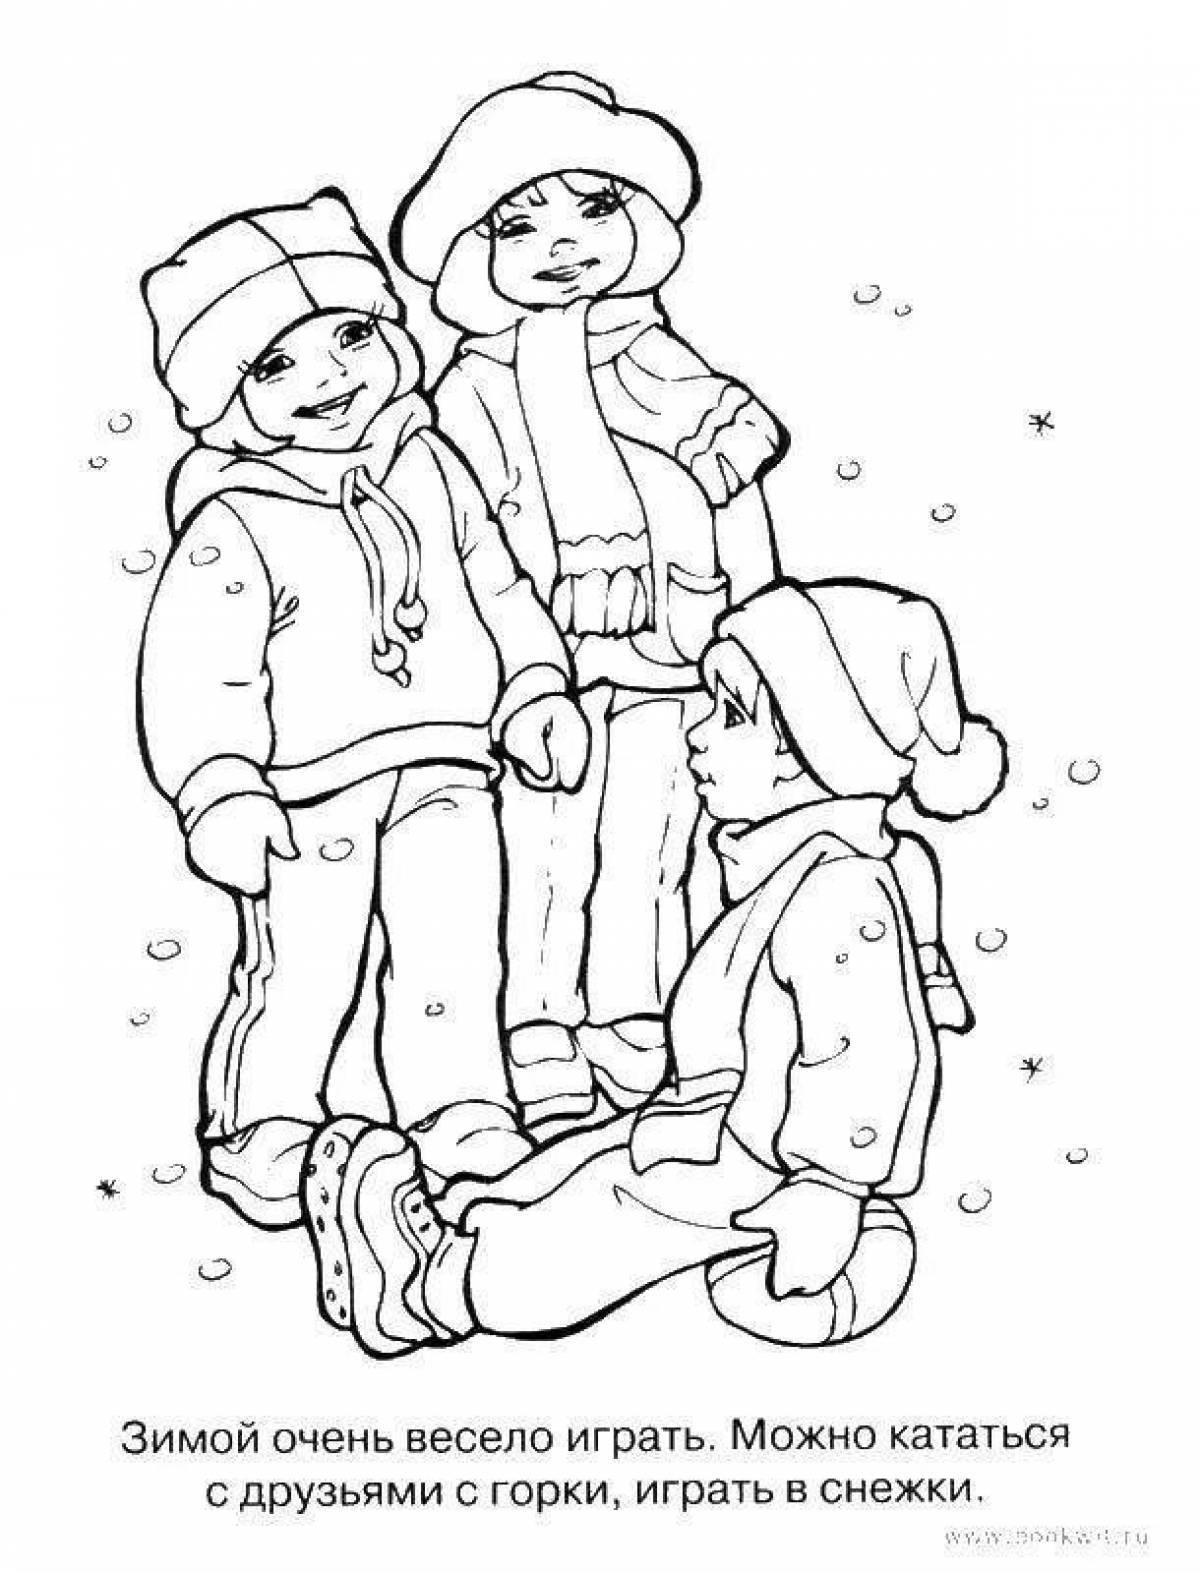 Royal coloring for children boy in winter clothes